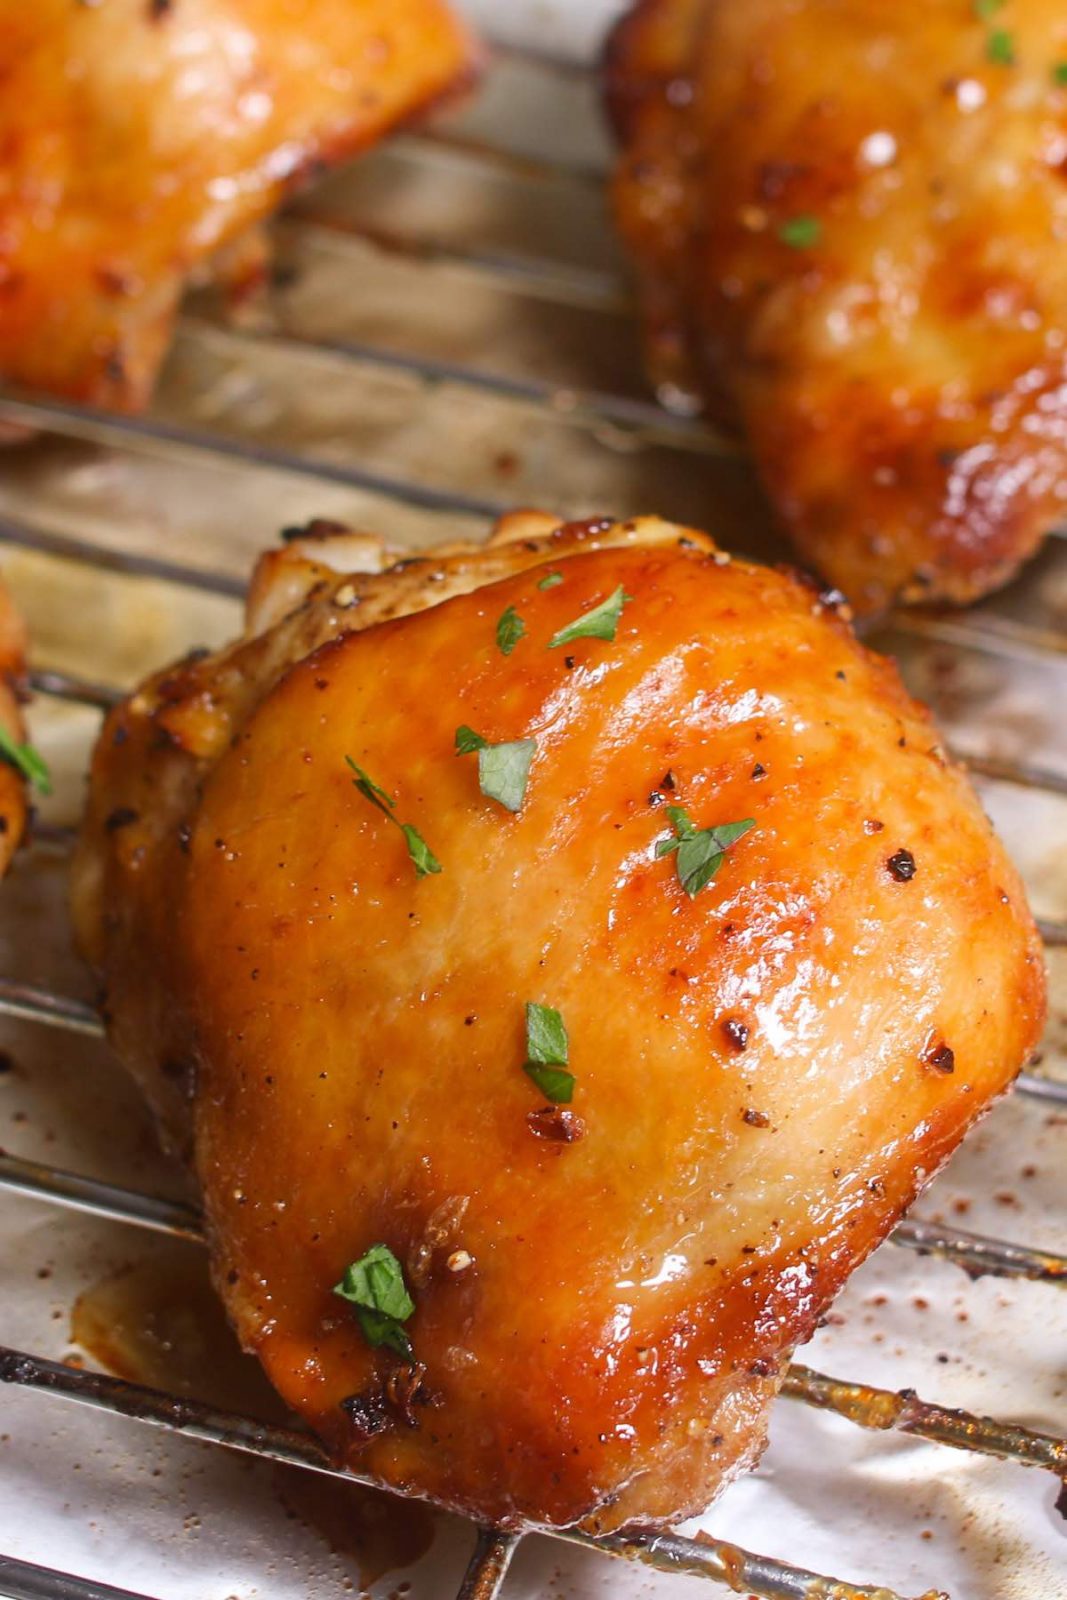 These Weeknight Dinner Baked Chicken Thighs are crispy on the outside with tender dark meat on the inside. With a few tips and some simple ingredients, you can easily make delicious chicken thighs for a simple one pan dinner!